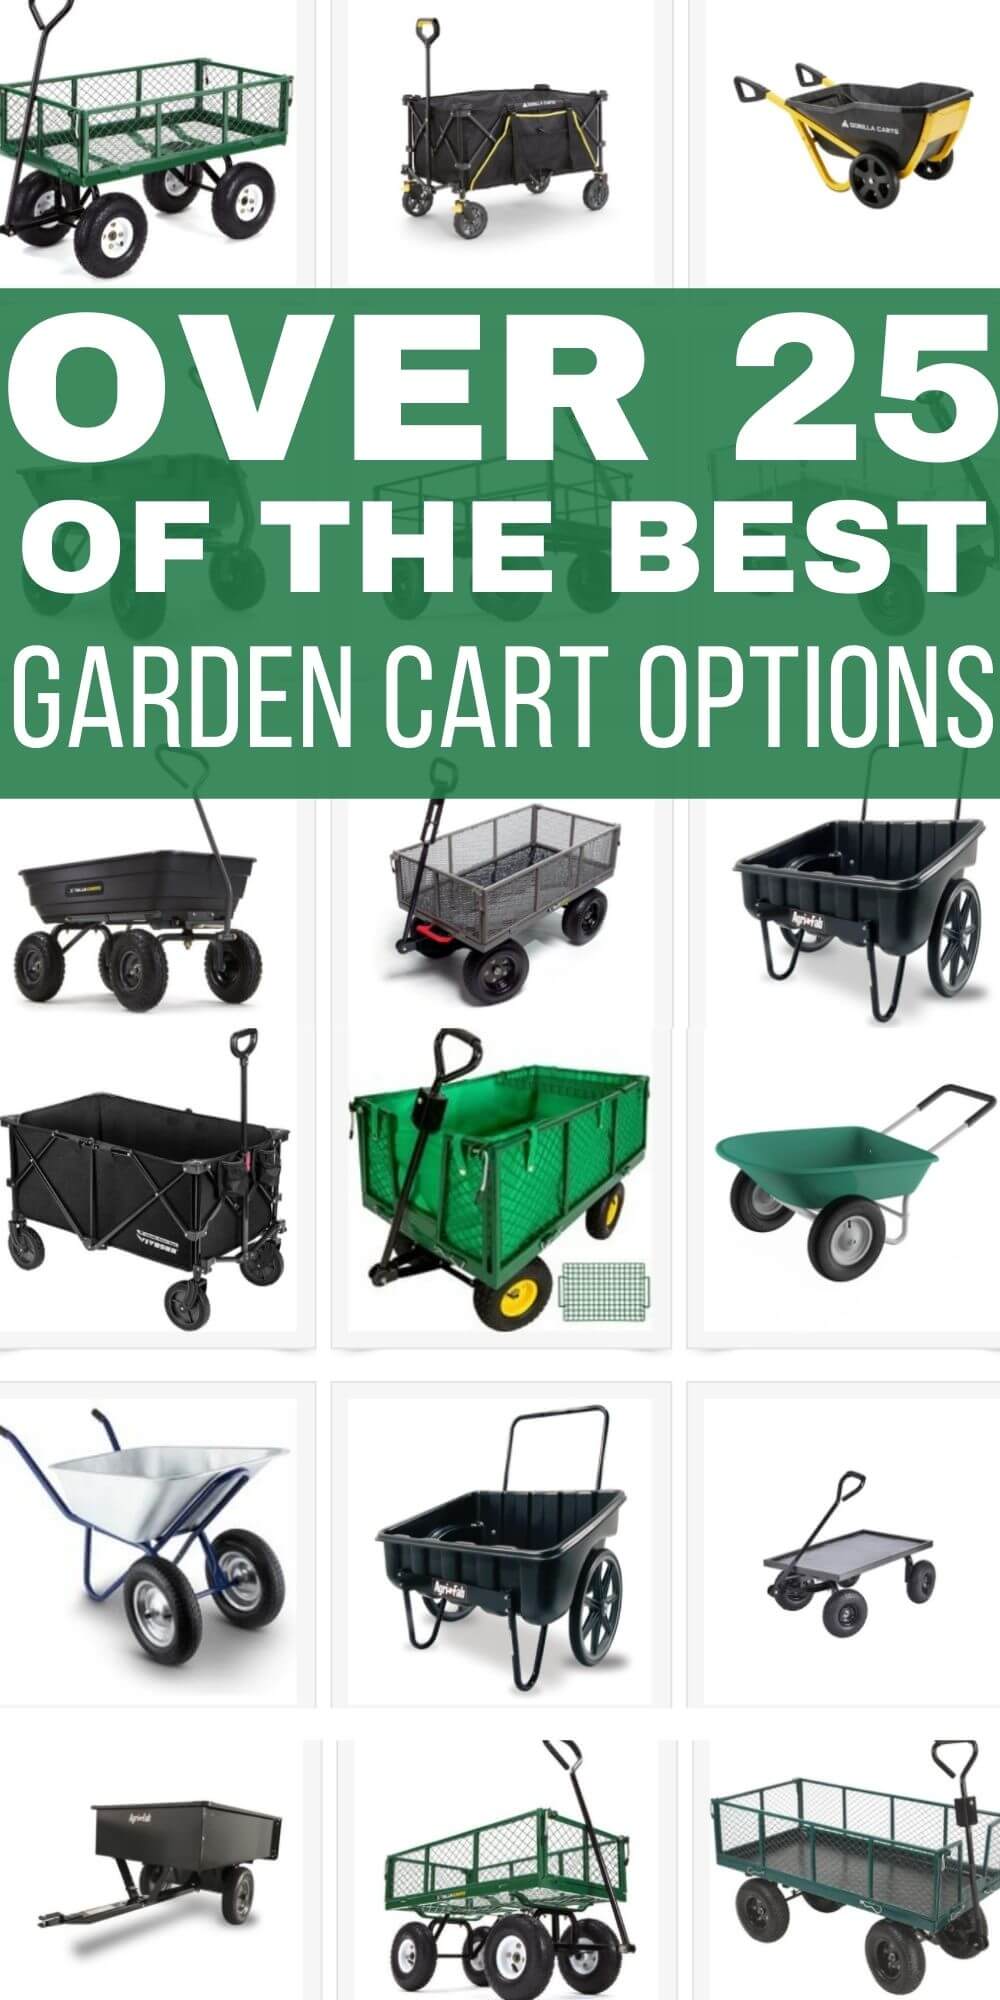 Over 25 of the Best Garden Cart Options for 2021